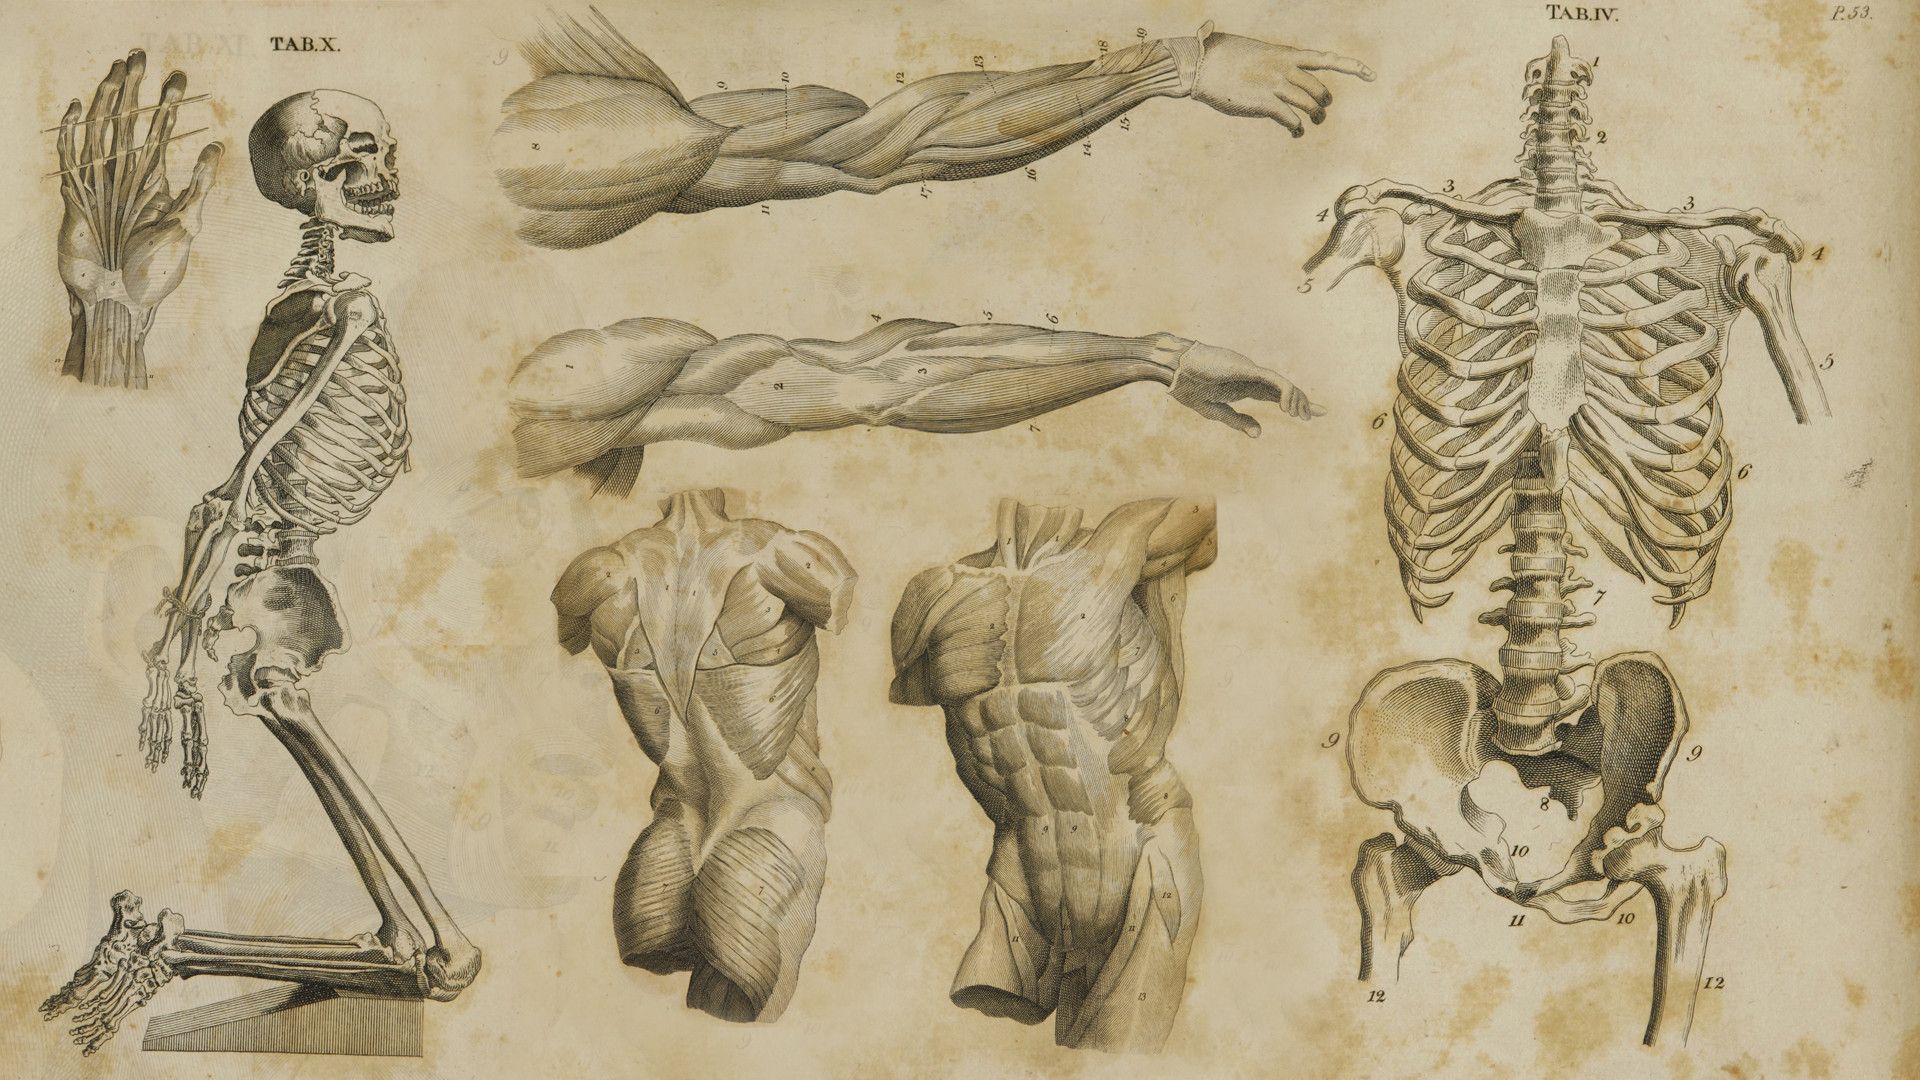 A collection of antique prints of human anatomy - Anatomy